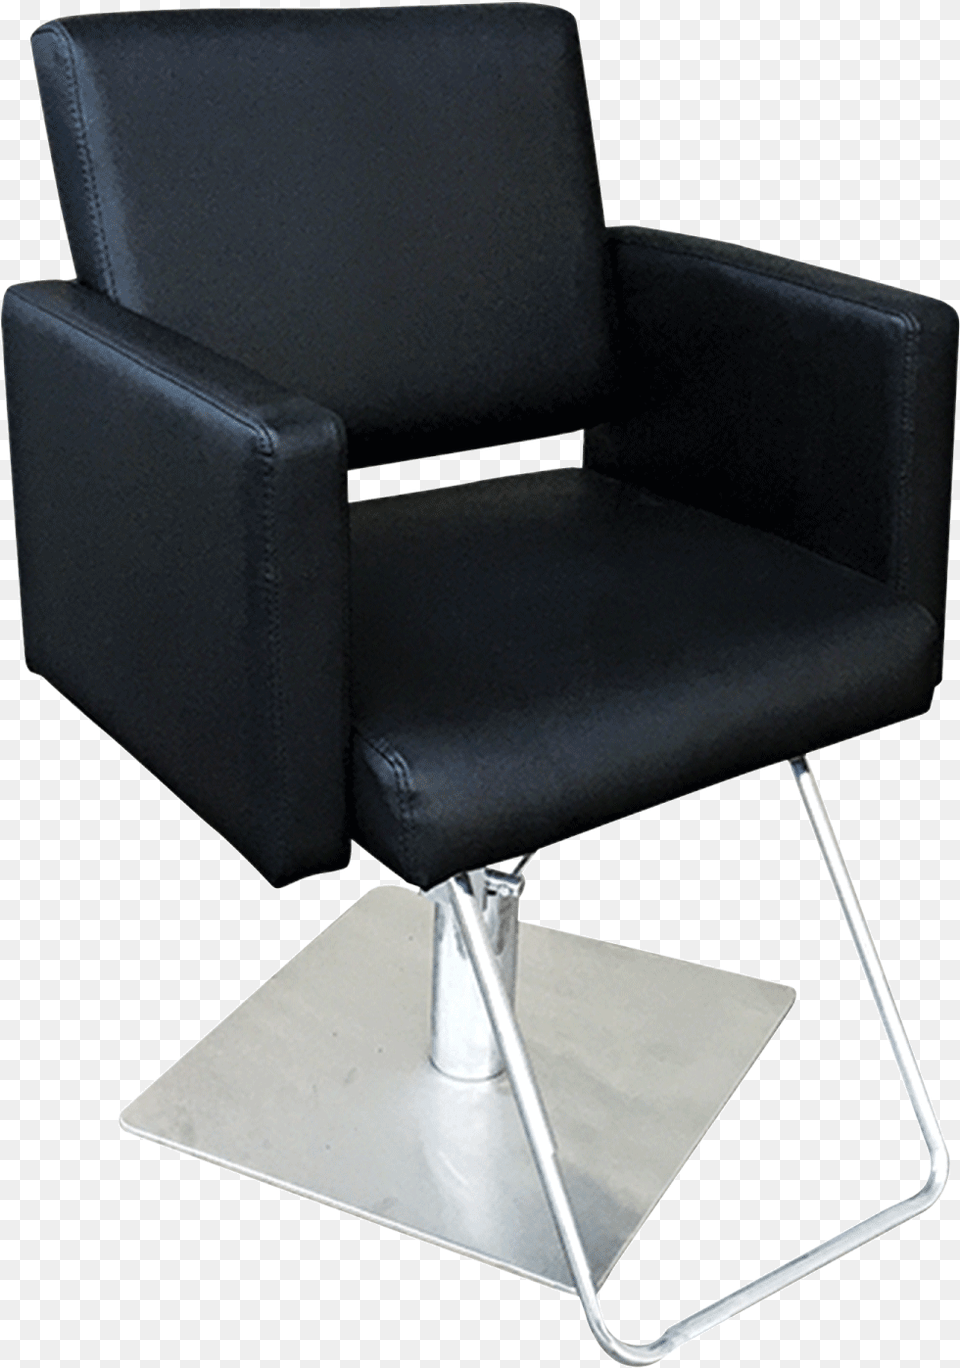 Cosmoprof Salon Chairs, Chair, Furniture, Armchair Png Image